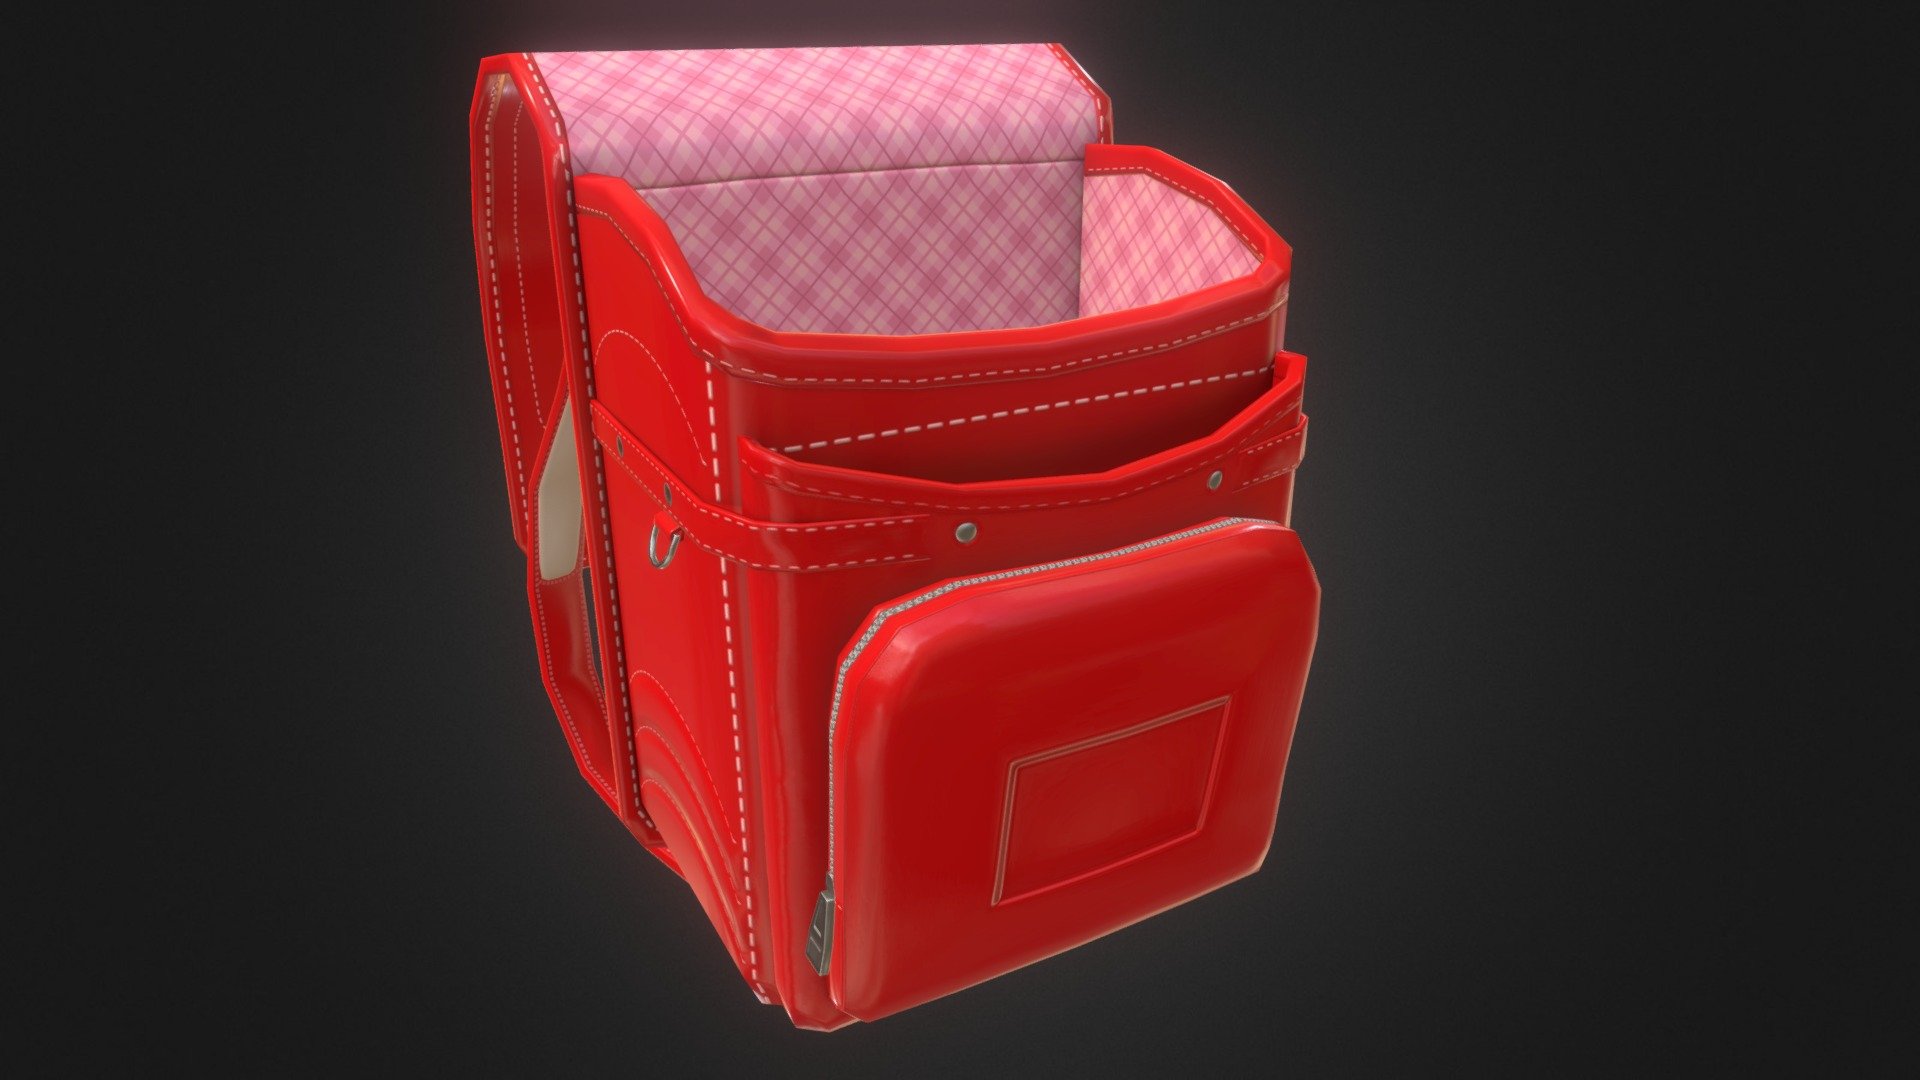 Child Backpack 3D Models for Download | TurboSquid